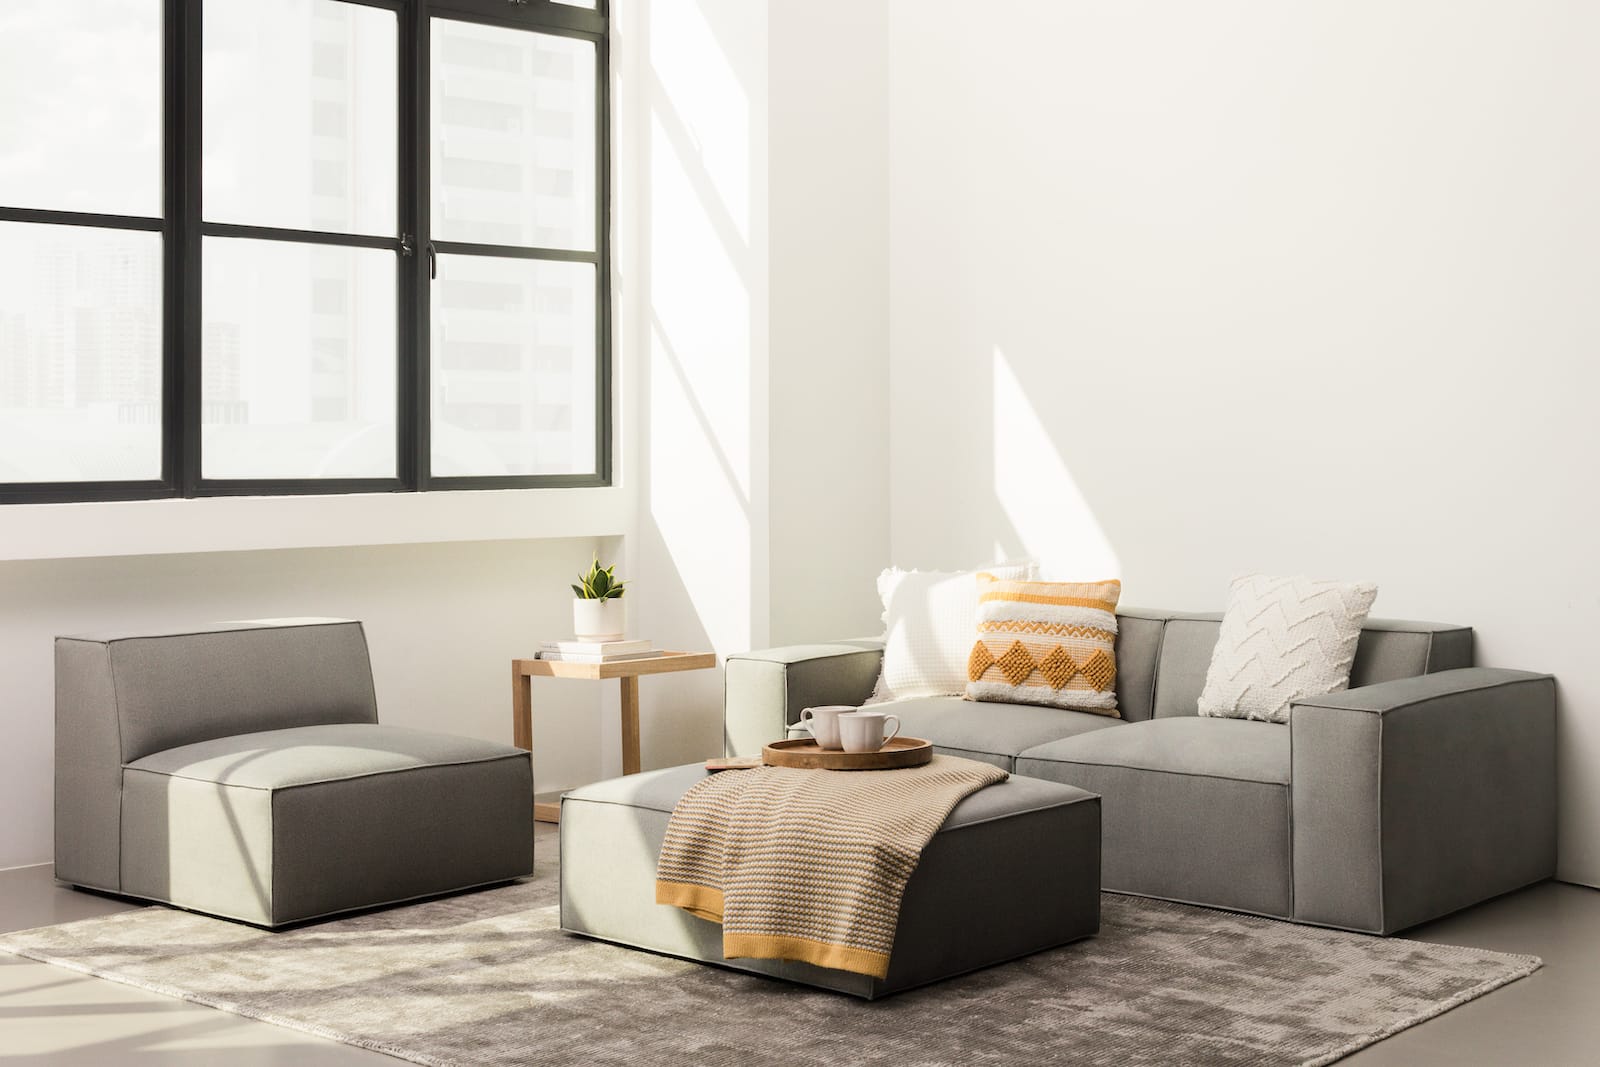 The pacific modular sectional - grey